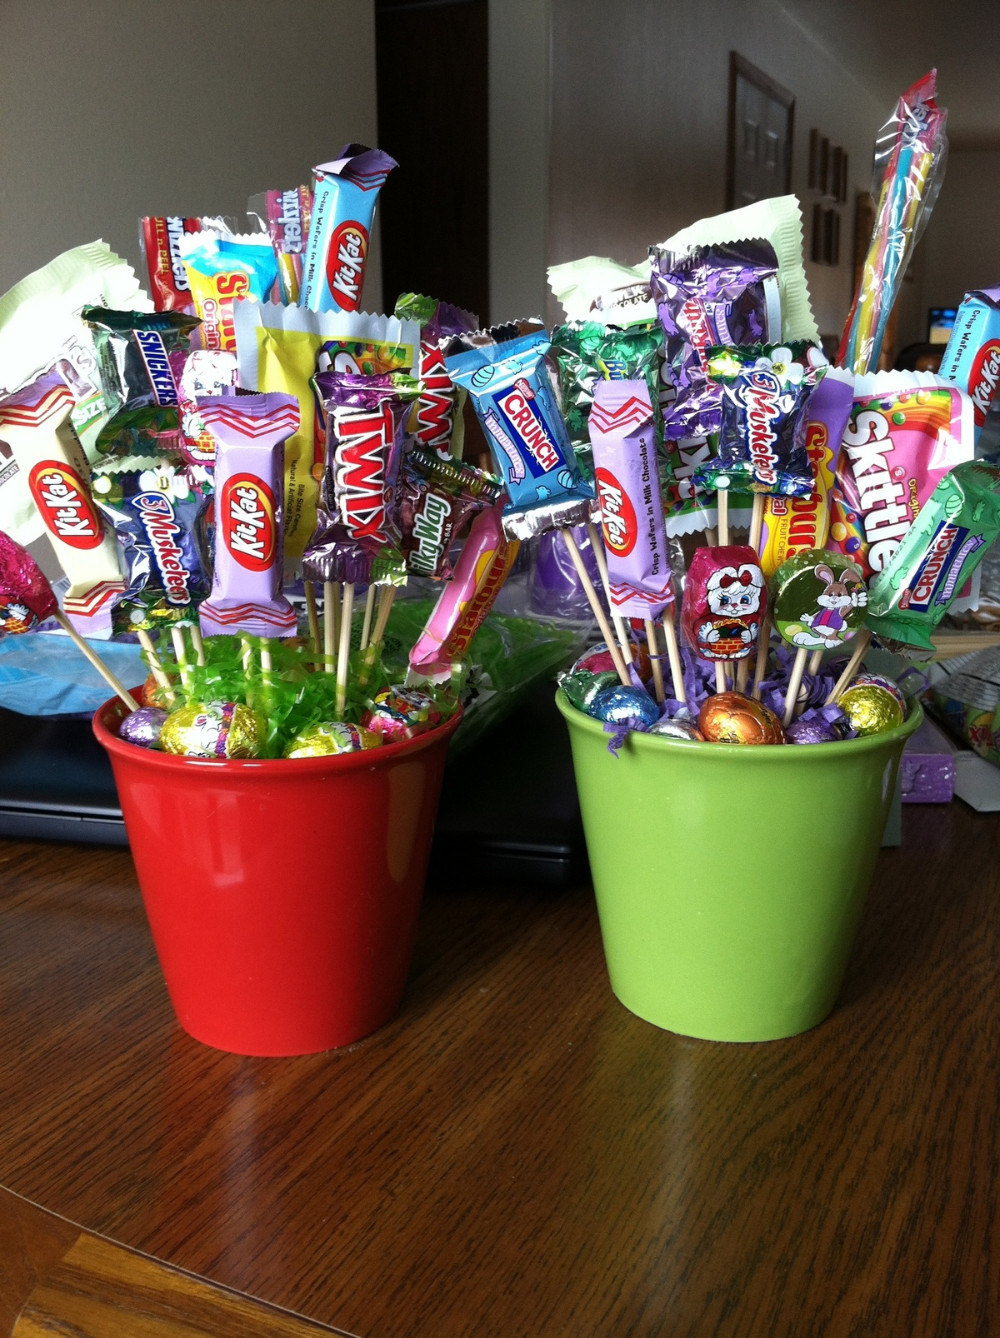 Candy Gift Baskets For Valentines Day
 60 Adorable DIY Valentine s Day Gift Baskets For Him That